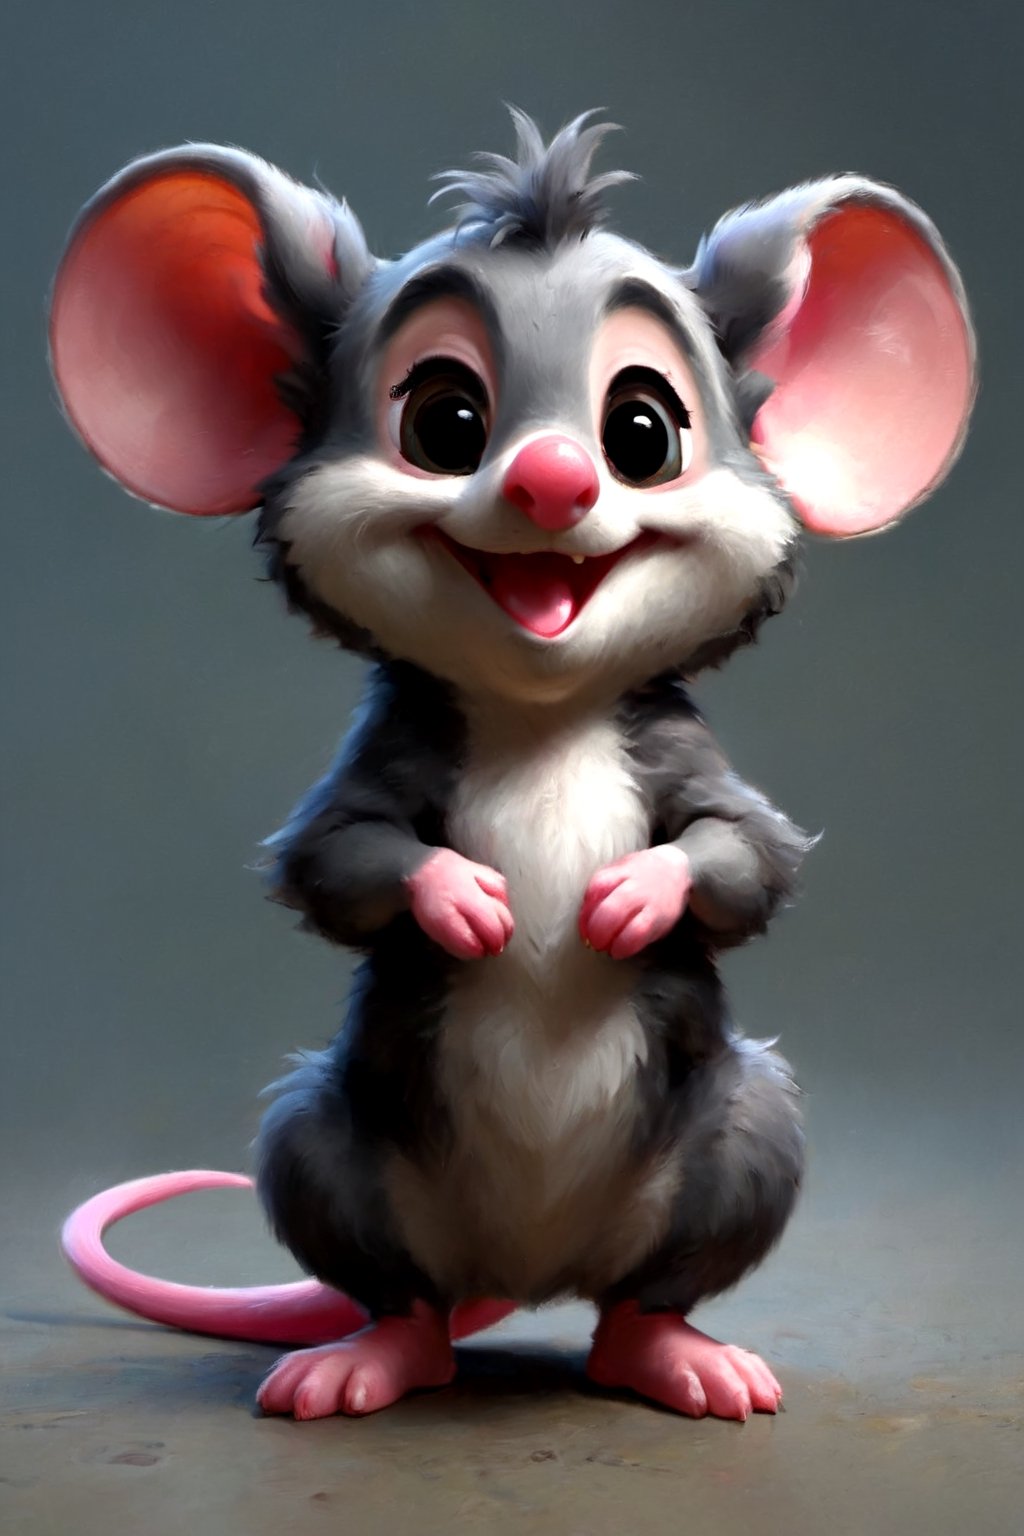 highly detailed, high quality, masterpiece, beautiful,(medium short shot),
animalmouse, gray color, boy, cartoon, cute, standing, smiling, looking forward, eyes closed, mouth open, pink nose, pink tail, gray fur, chubby, short, unclothed, background: no background